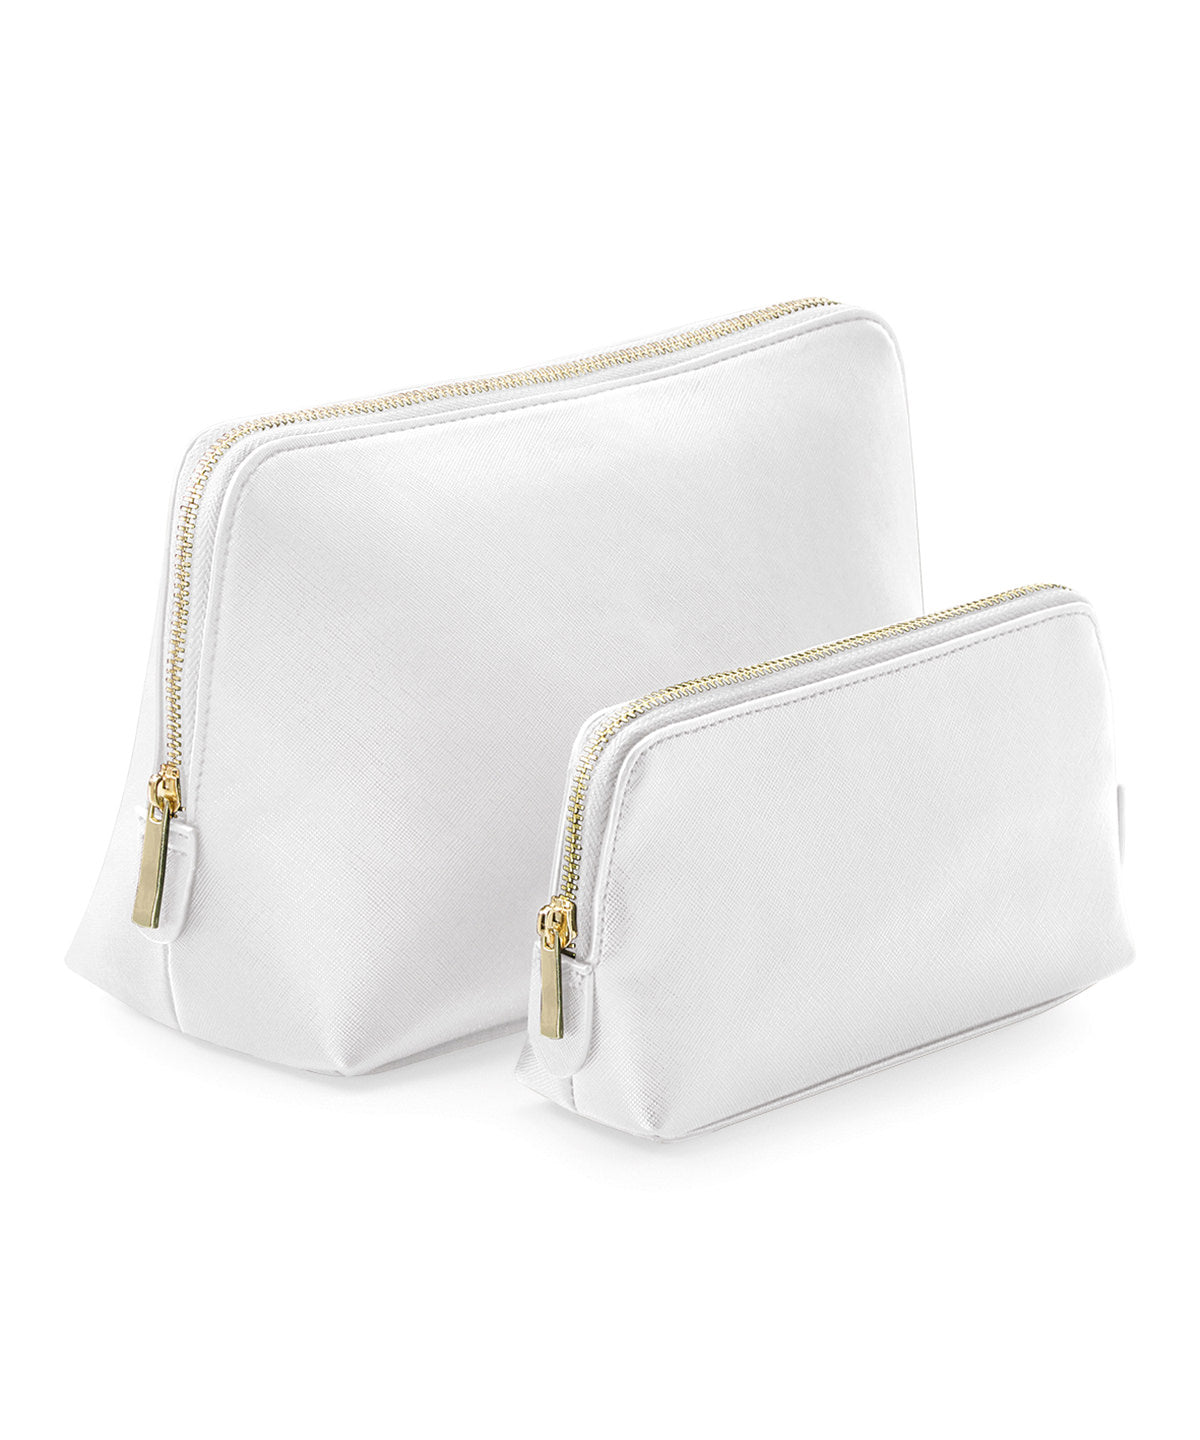 Personalised Bags - Off White Bagbase Boutique accessory case